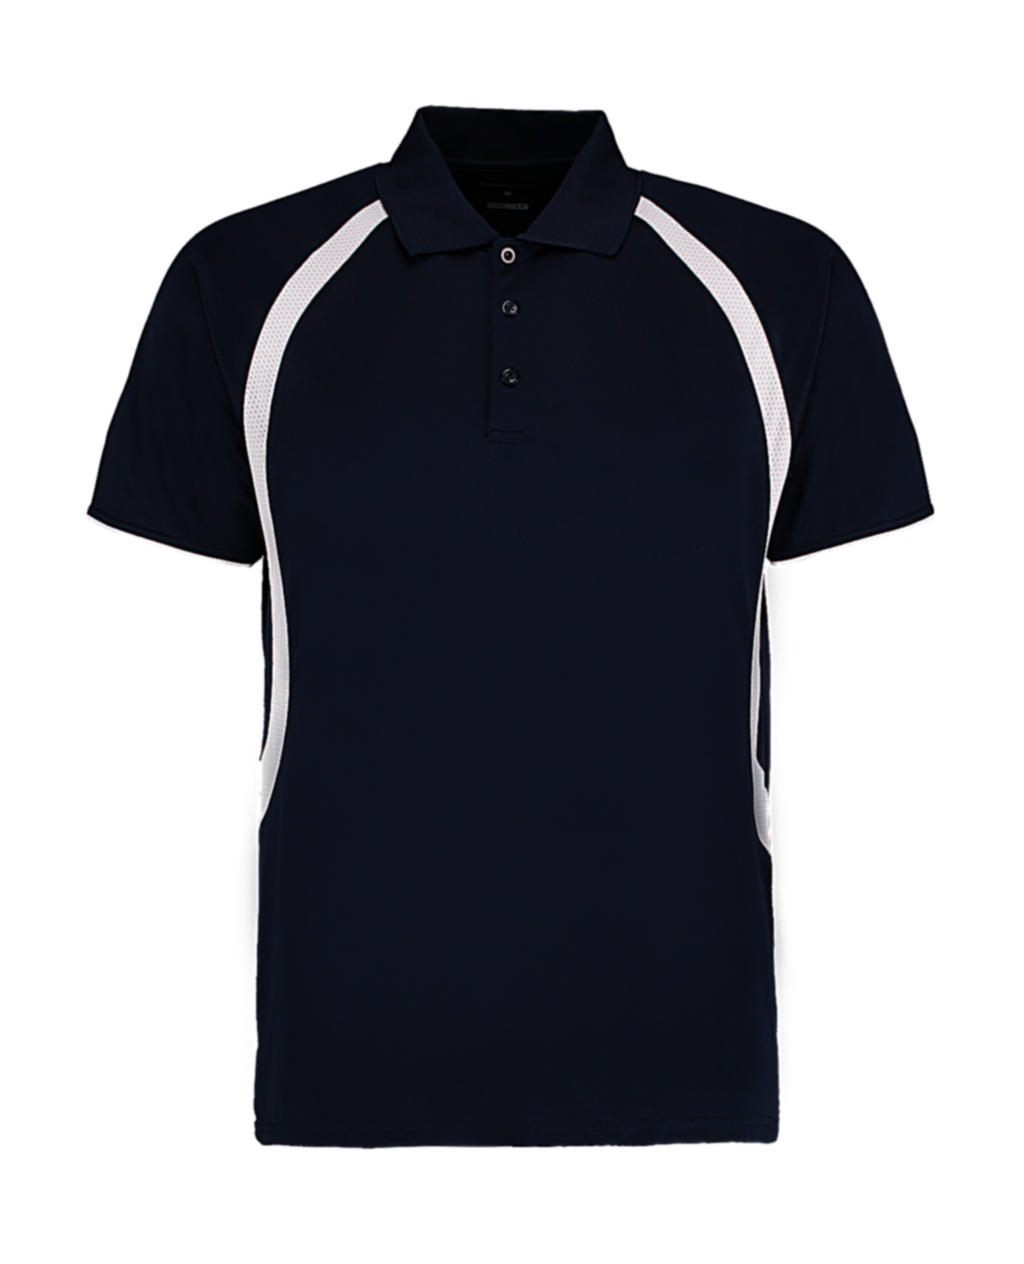 550.11 / Classic Fit Cooltex® Riviera Polo Shirt / Navy/White